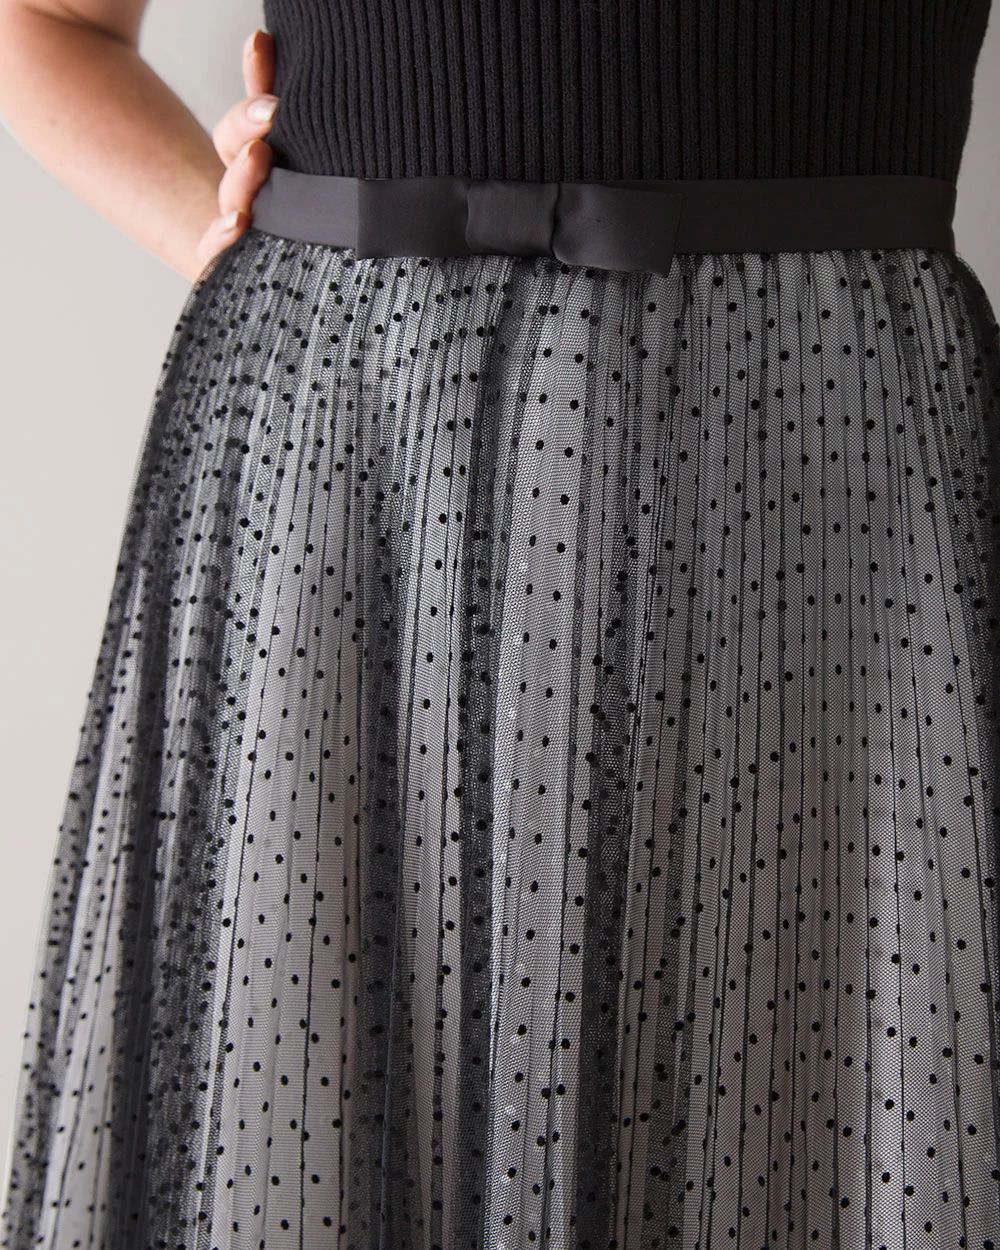 Dotted Tulle Evening Skirt click to view larger image.